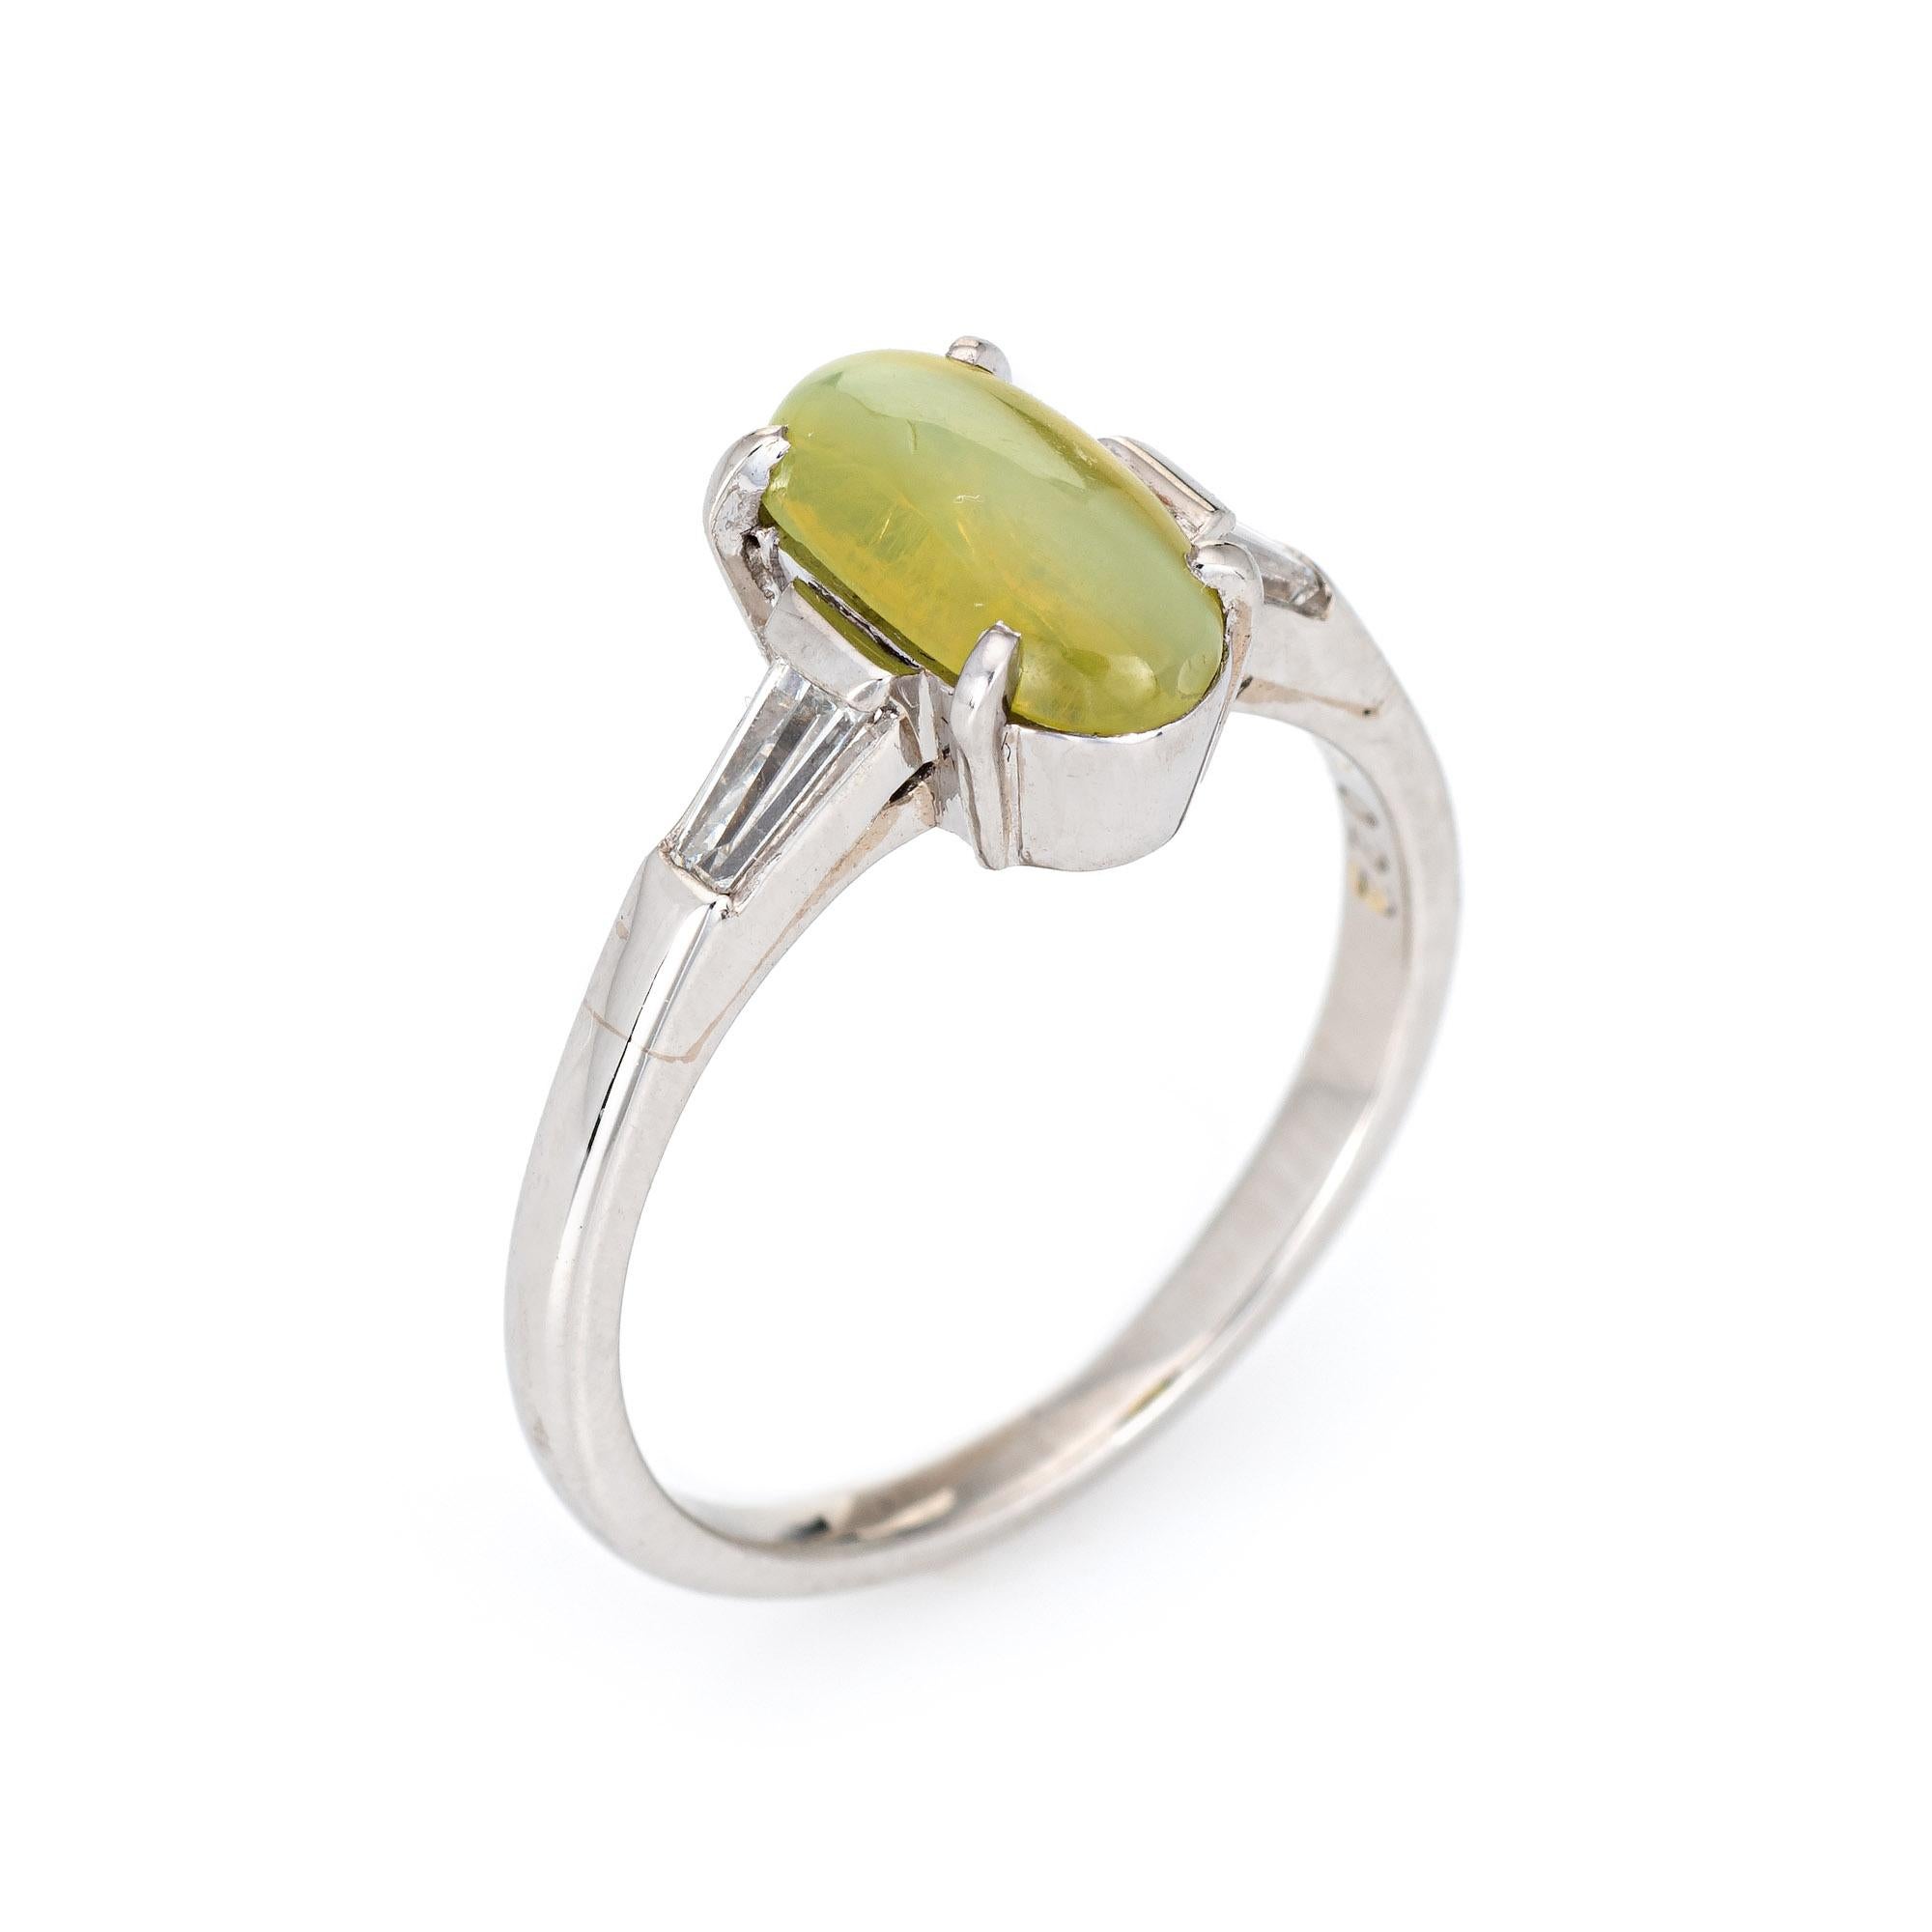 Stylish cat's eye chrysoberyl & diamond cocktail ring crafted in 900 platinum. 

Cat's eye chrysoberyl measures 9.4mm x 5.4mm (1.69 carats), accented with 0.22 carats of tapered baguette diamonds (estimated at G-H color and VS1-2 clarity). The cat's